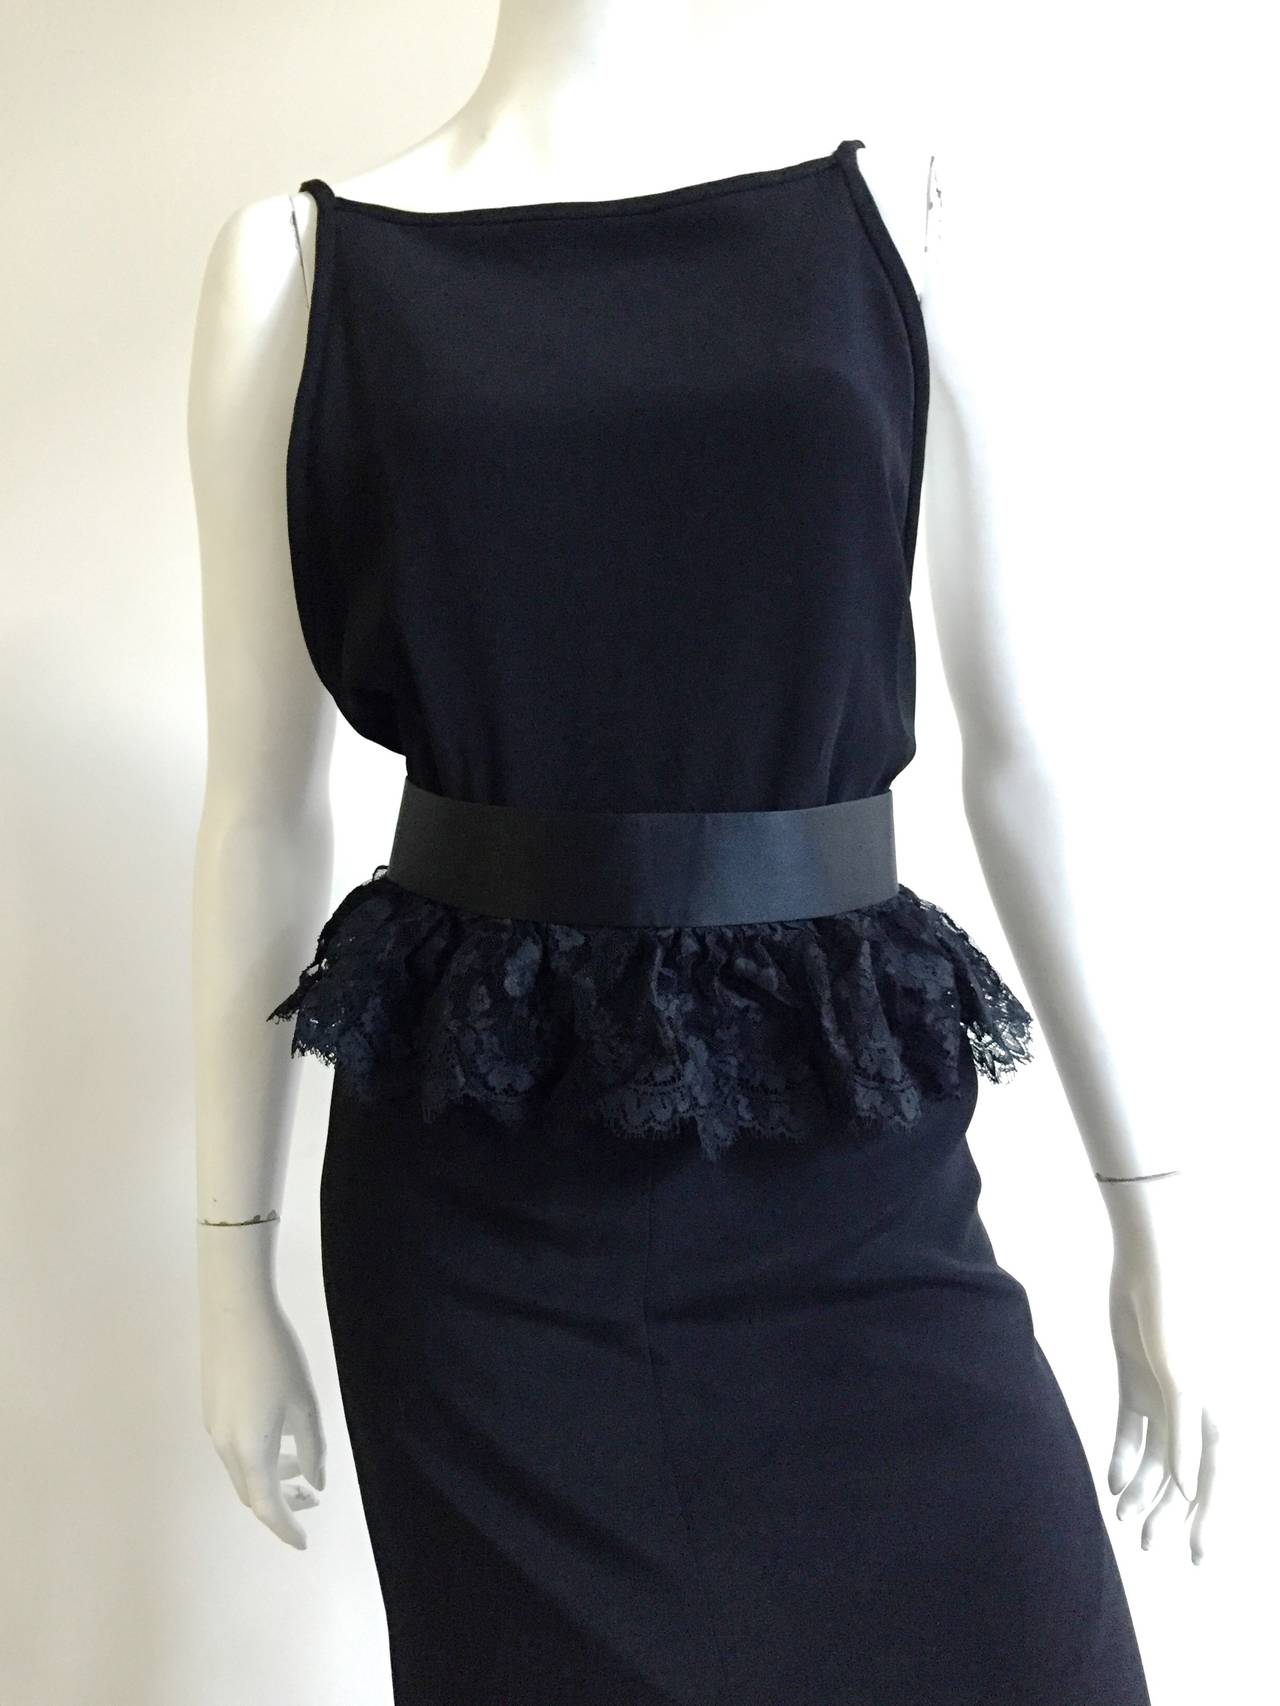 Bob Mackie 70s Black Gown Size 6. at 1stdibs